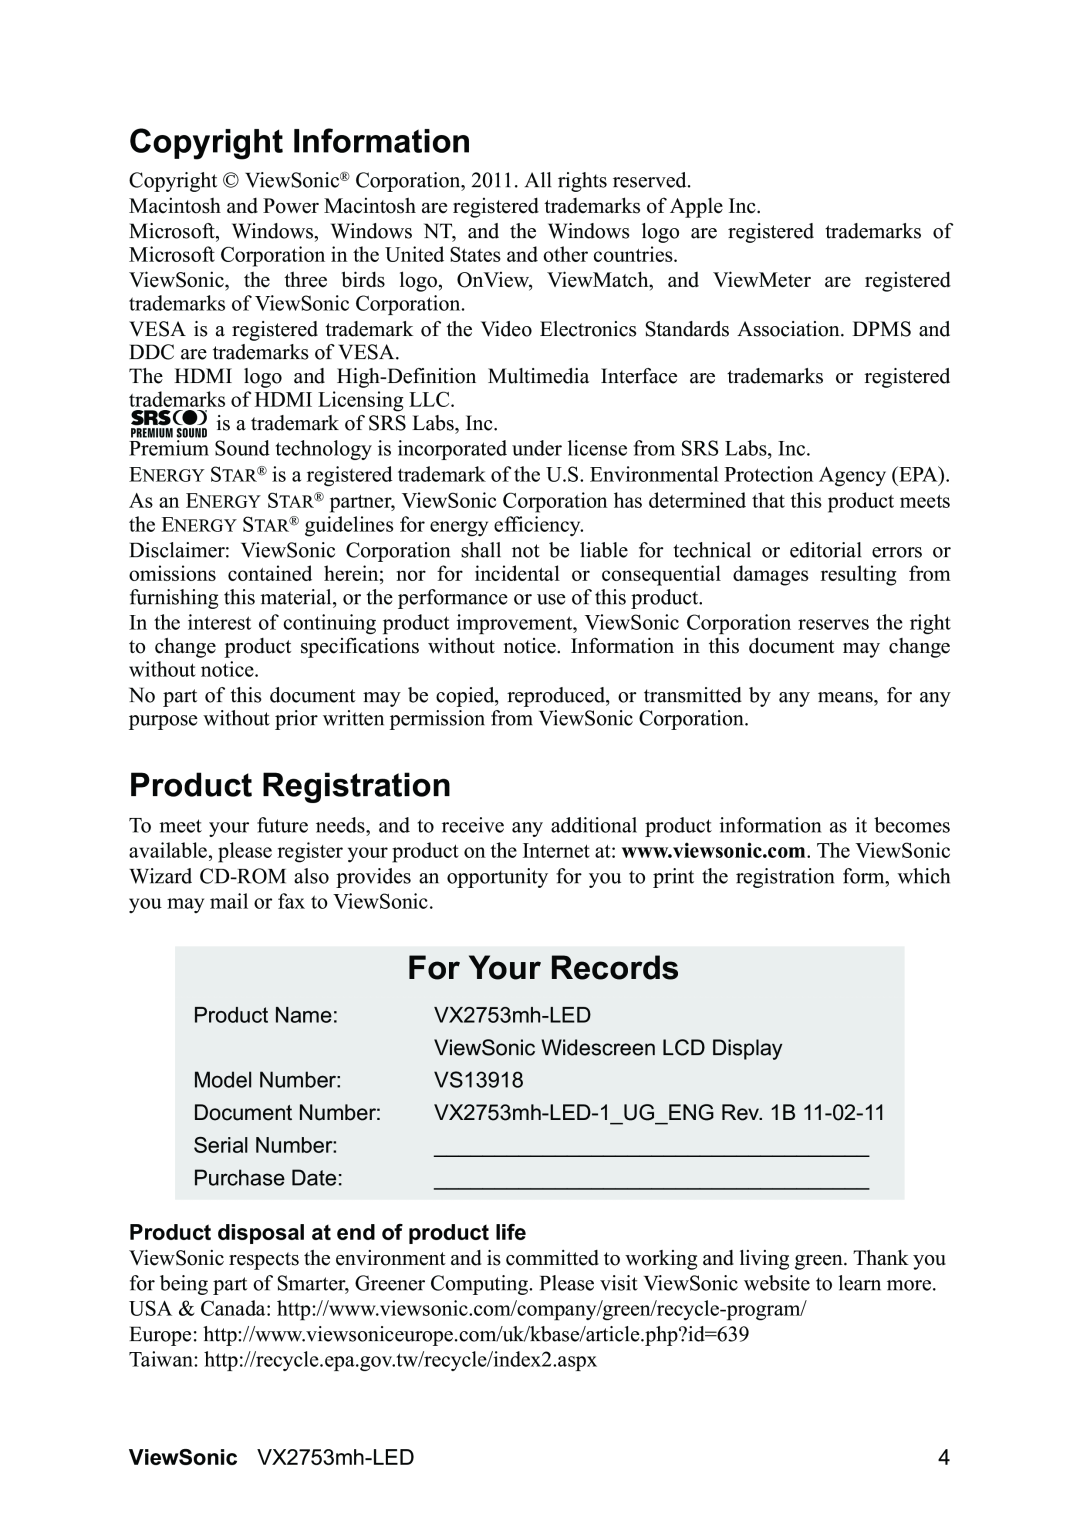 ViewSonic VX2753mh-LED warranty Copyright Information, Product Registration, For Your Records 